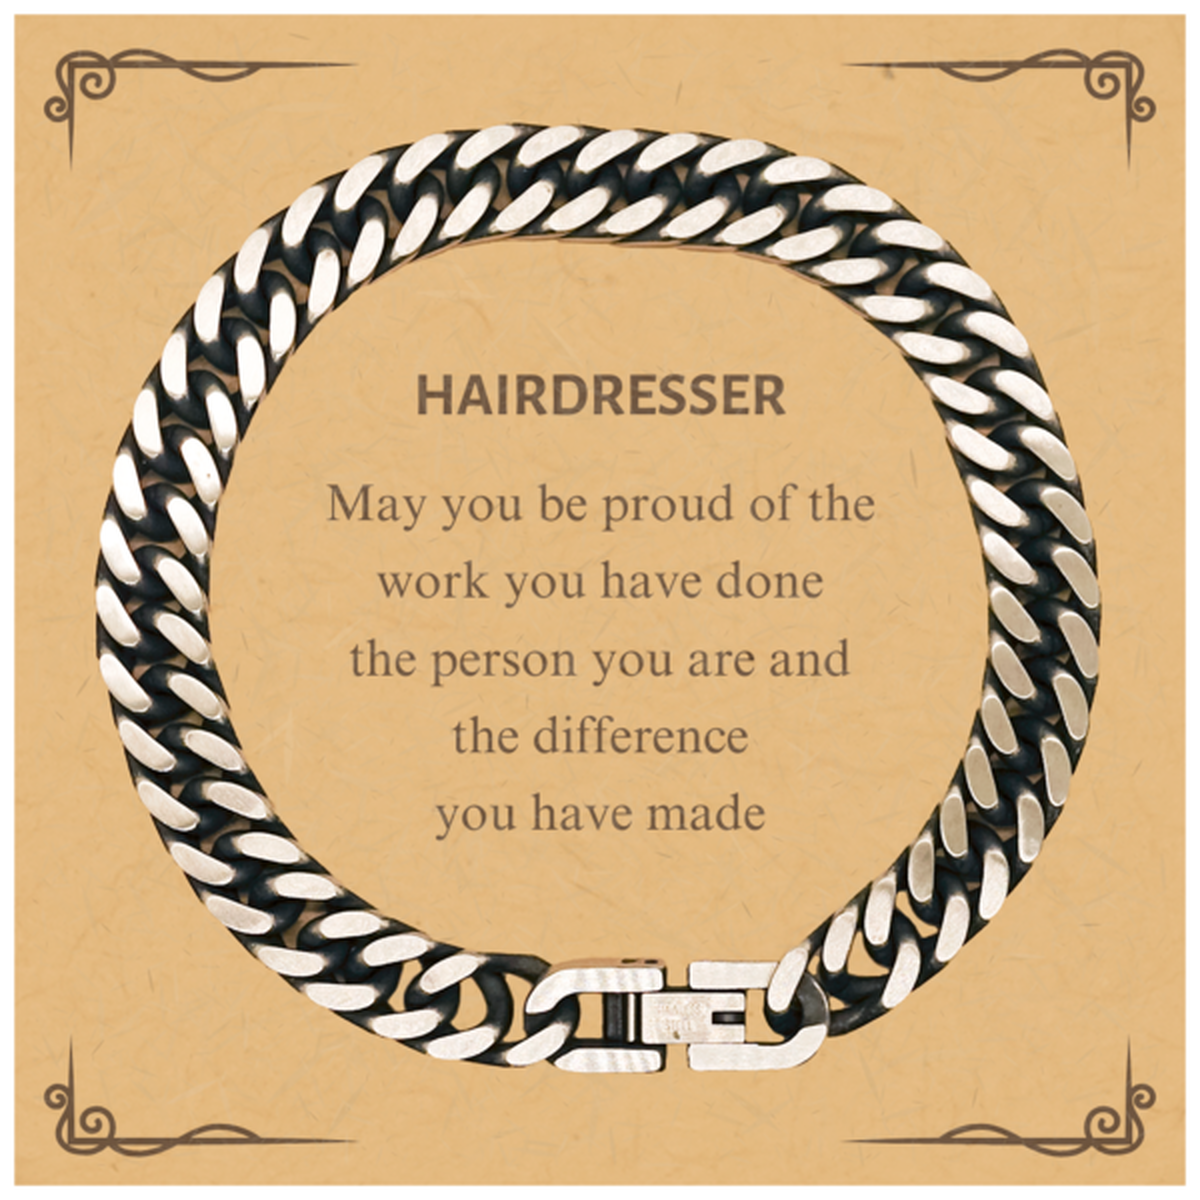 Hairdresser May you be proud of the work you have done, Retirement Hairdresser Cuban Link Chain Bracelet for Colleague Appreciation Gifts Amazing for Hairdresser